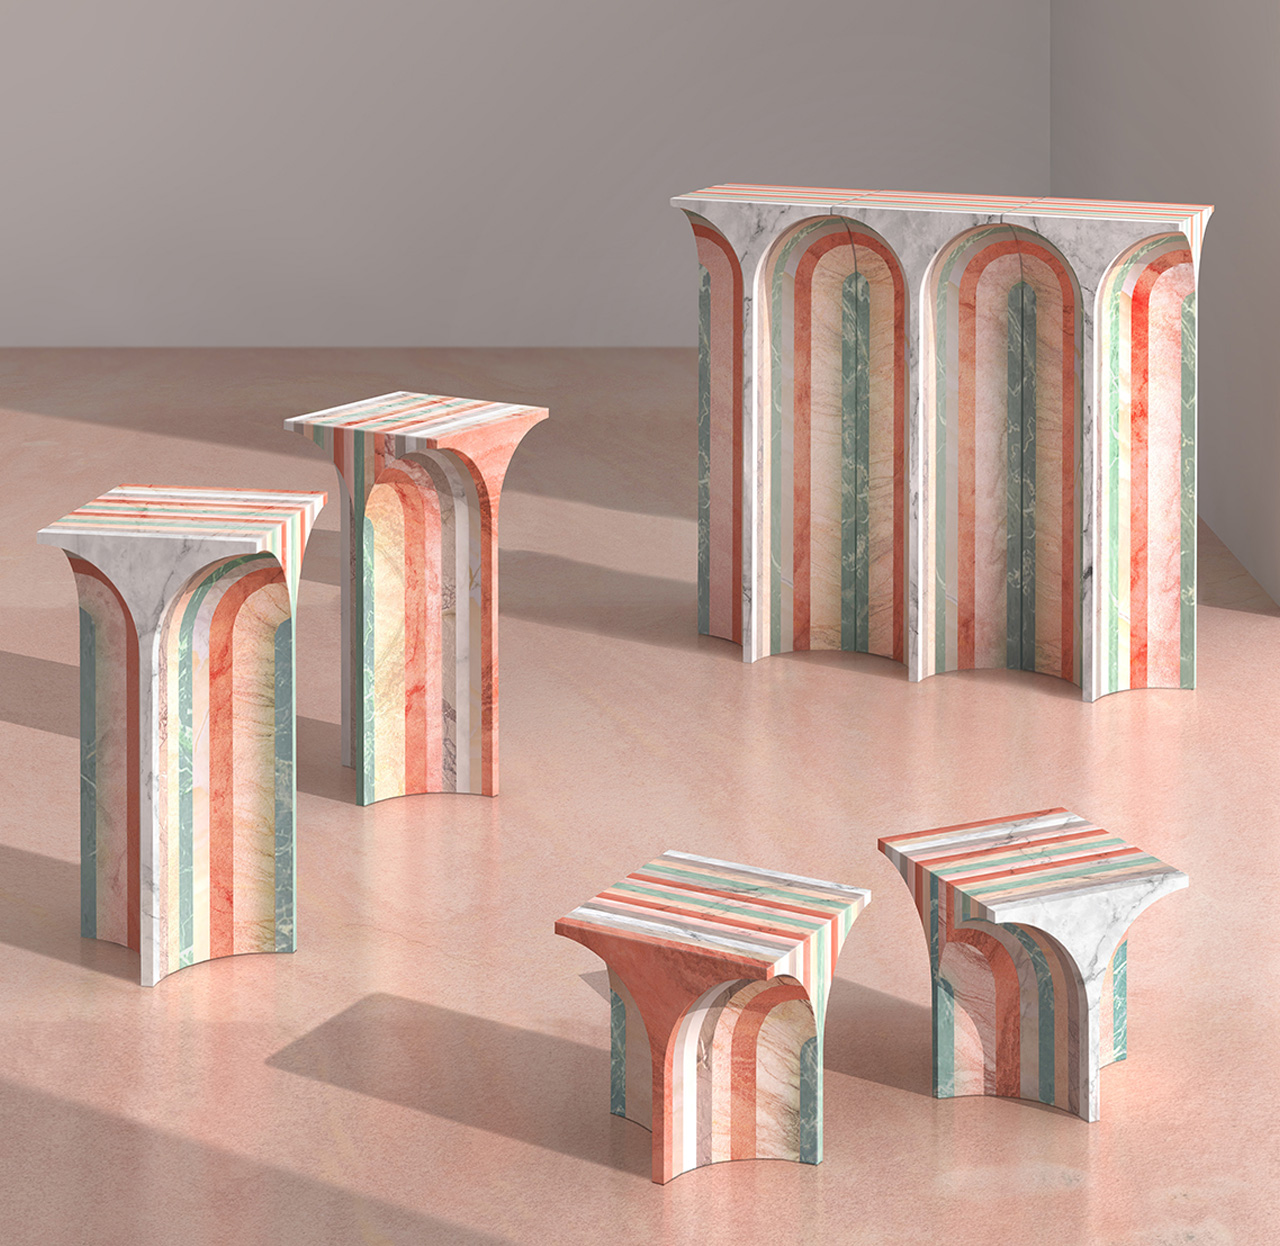 These five different kinds of tables were built from seven different kinds of marble